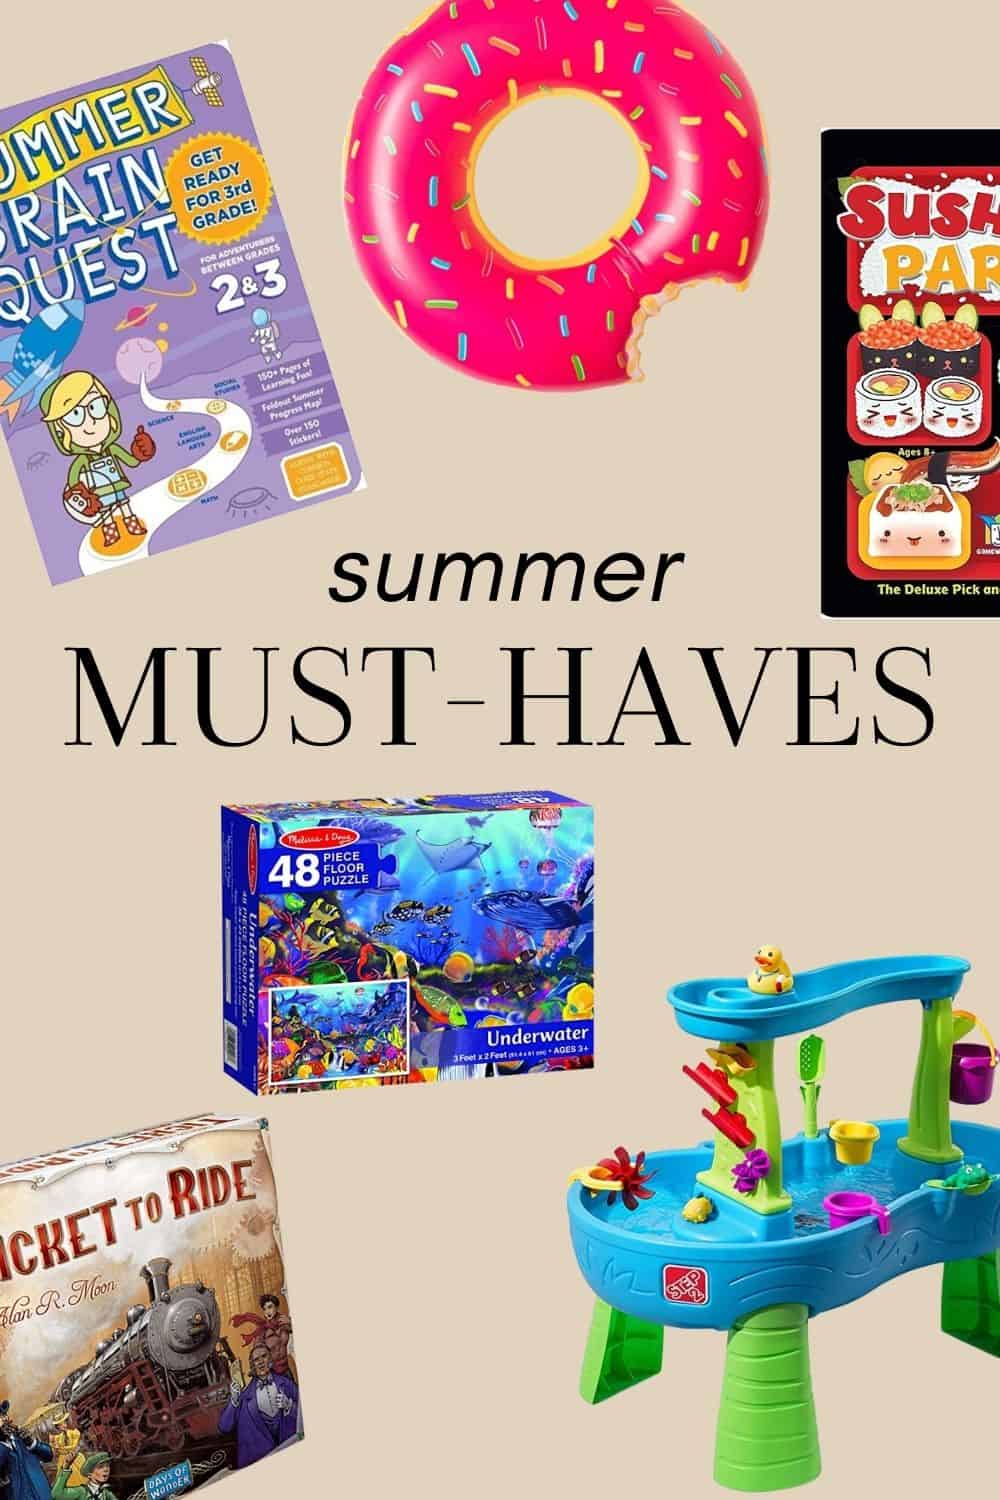 collage of summer activities and toys with text overlay that says "summer must-haves"